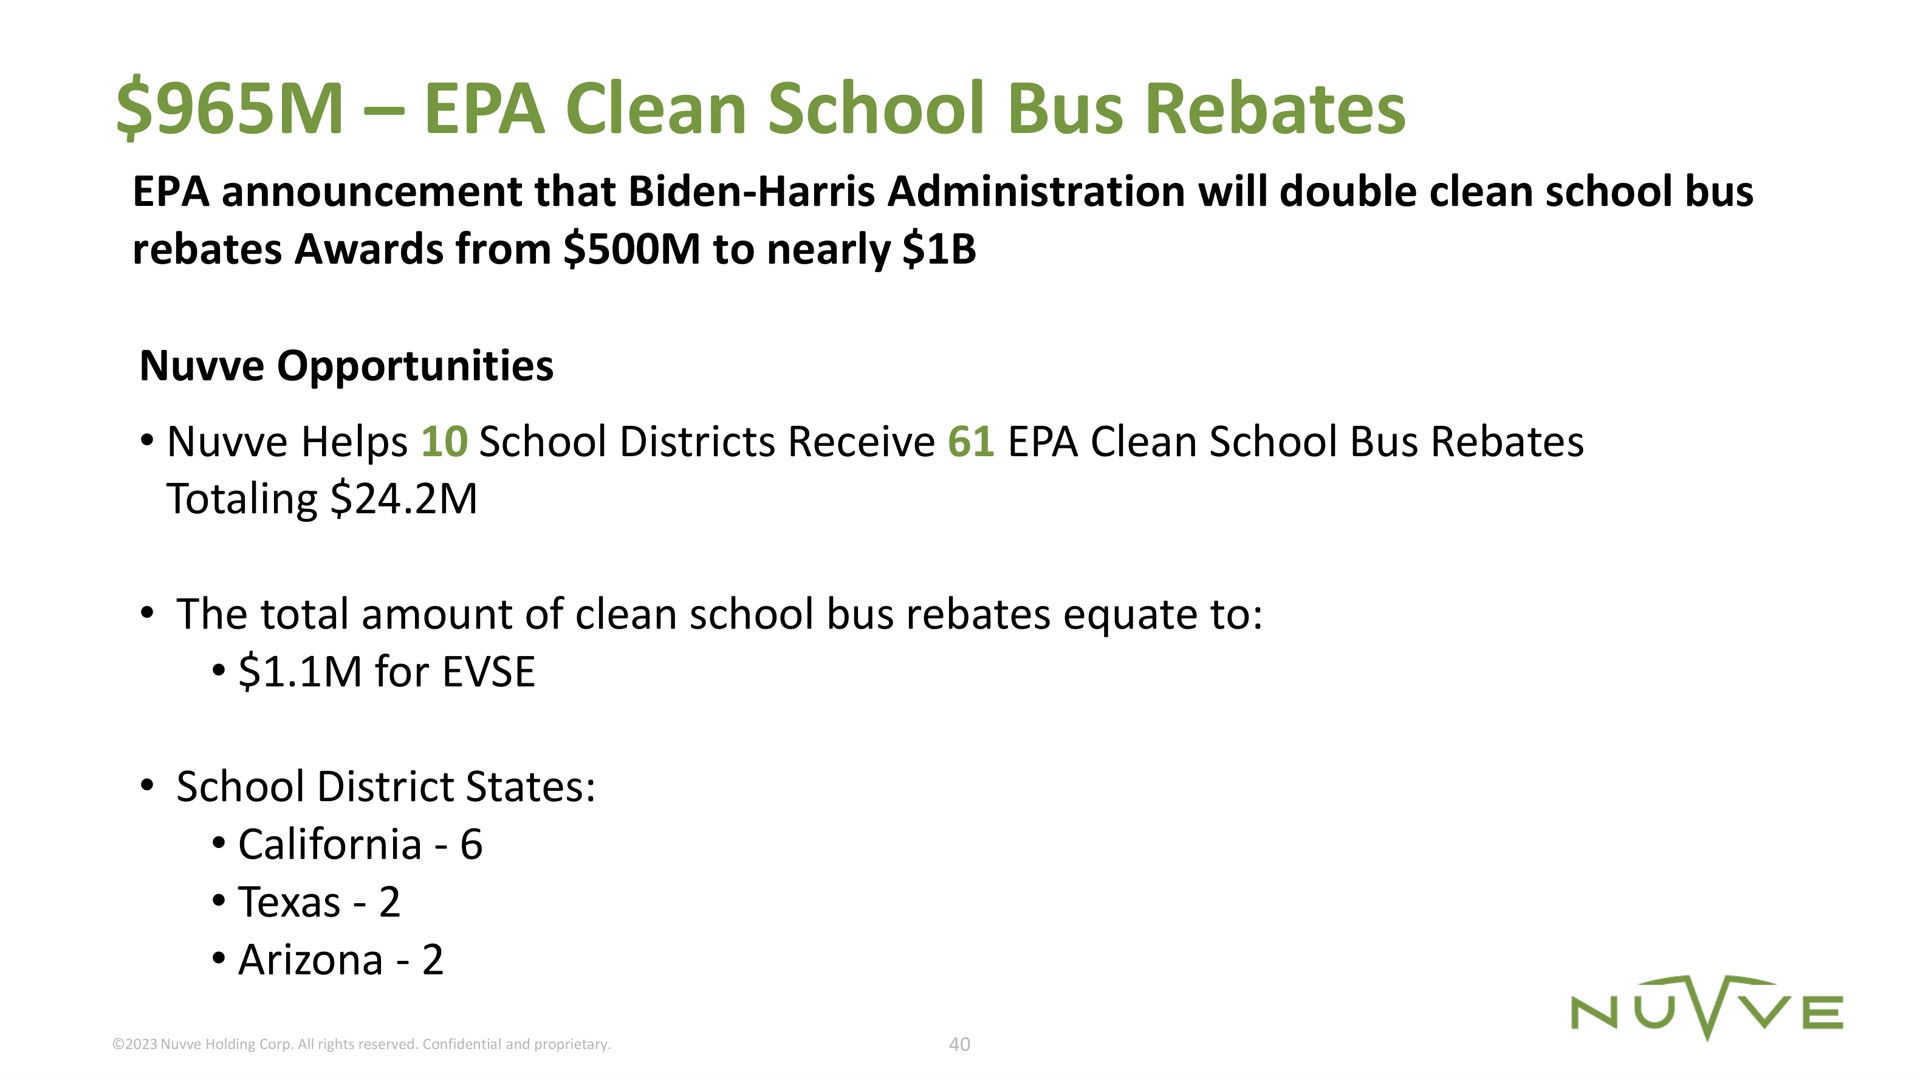 clean school bus rebates awards from to nearly helps districts receive totaling the total amount of equate to for | Nuvve